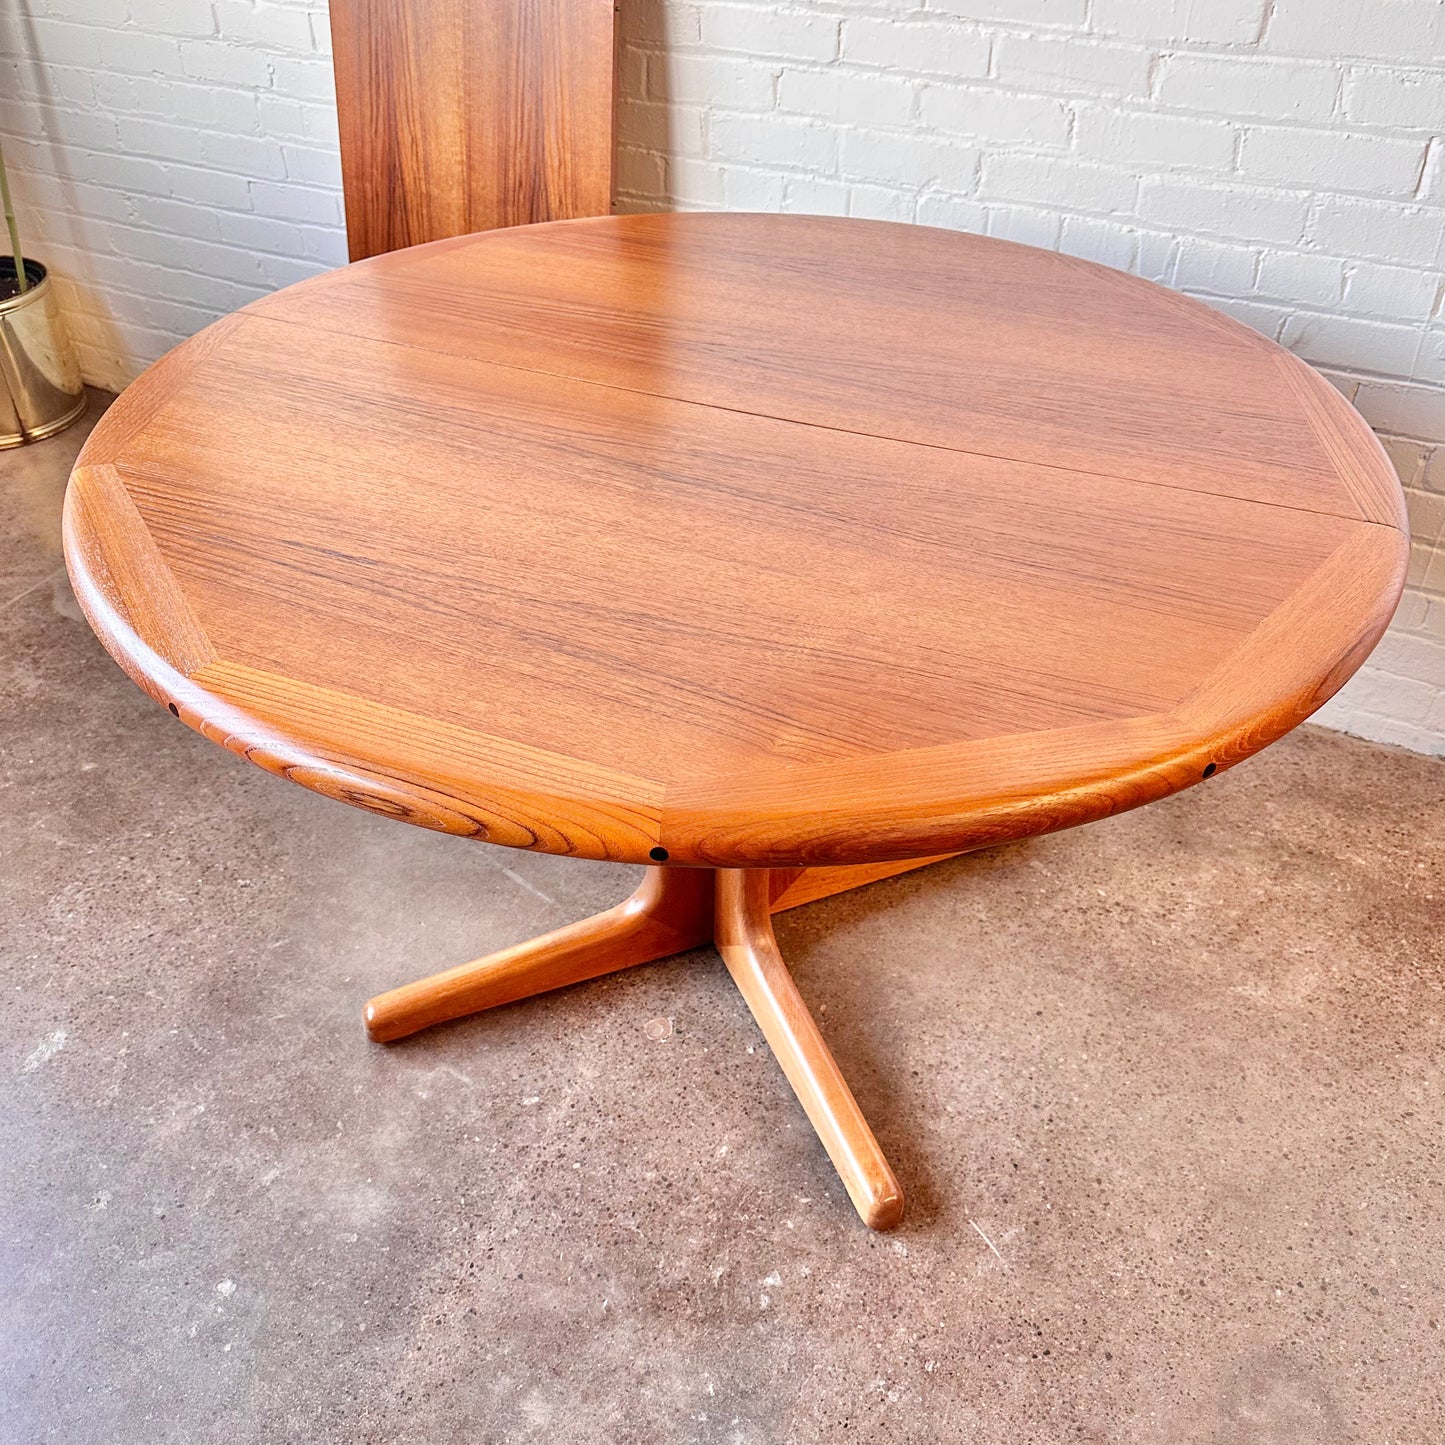 RESTORED DANISH TEAK ROUND DINING TABLE WITH LEAF